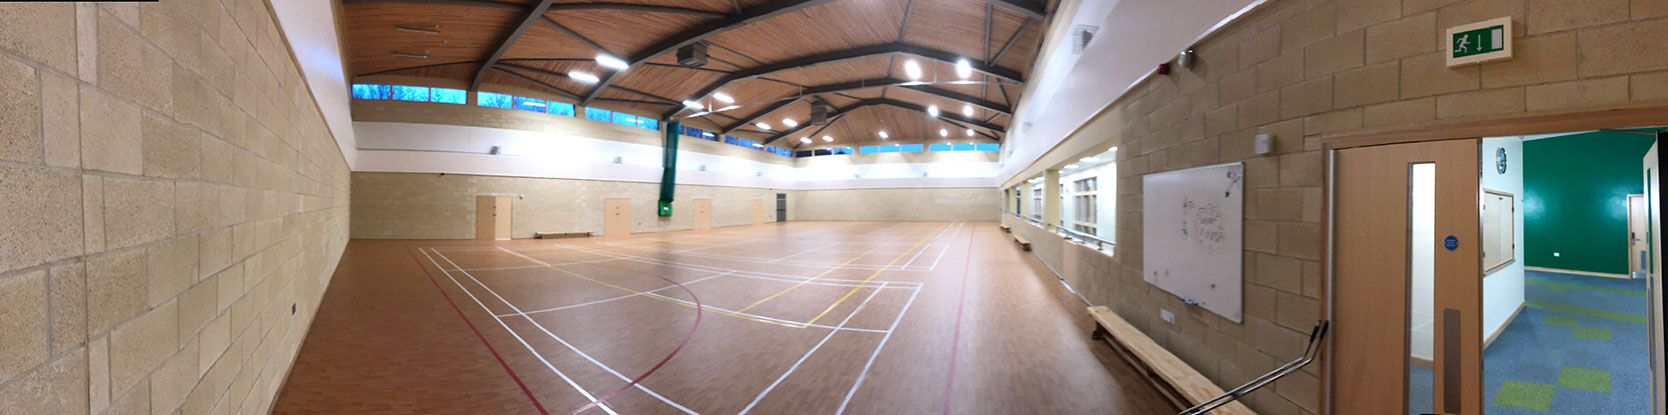 Benfield and Loxley: Manor School Sports Centre